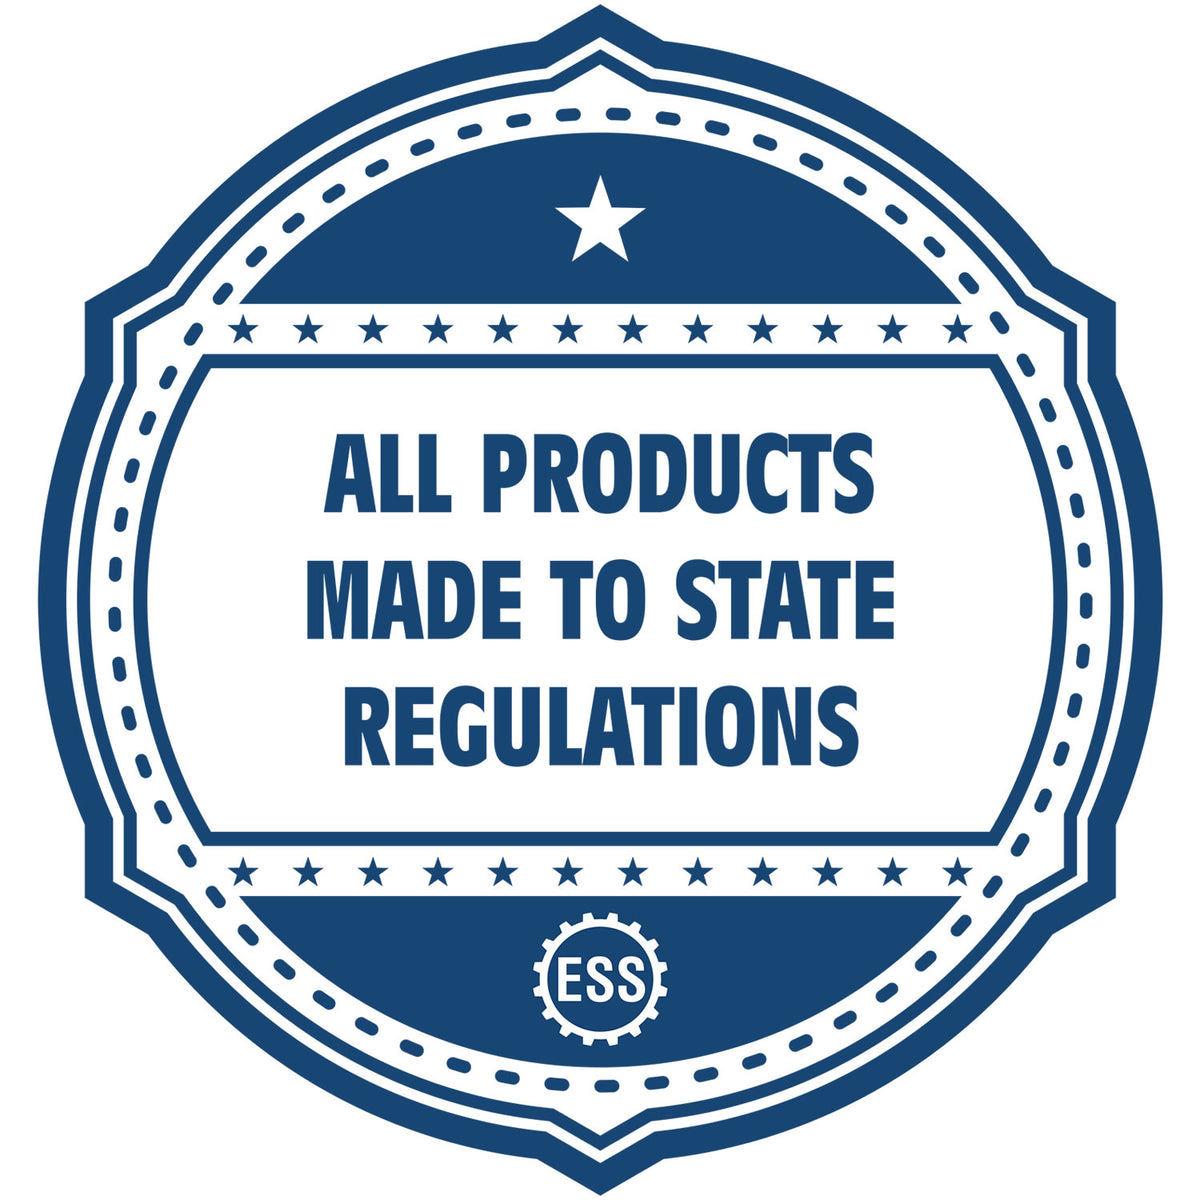 A blue icon or badge for the Slim Pre-Inked New York Professional Geologist Seal Stamp showing that this product is made in compliance with state regulations.